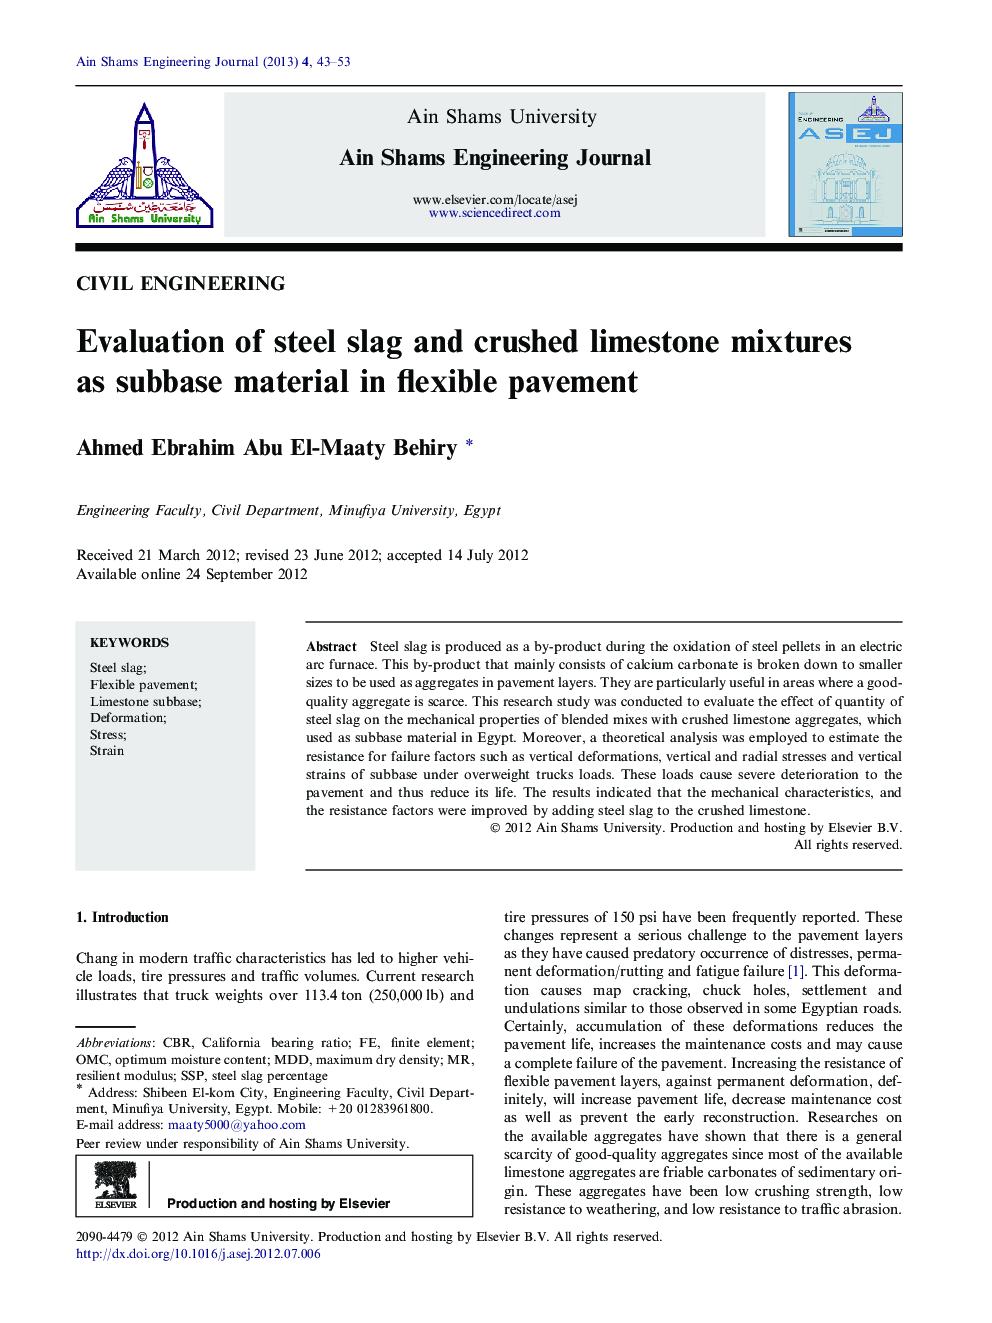 Evaluation of steel slag and crushed limestone mixtures as subbase material in flexible pavement